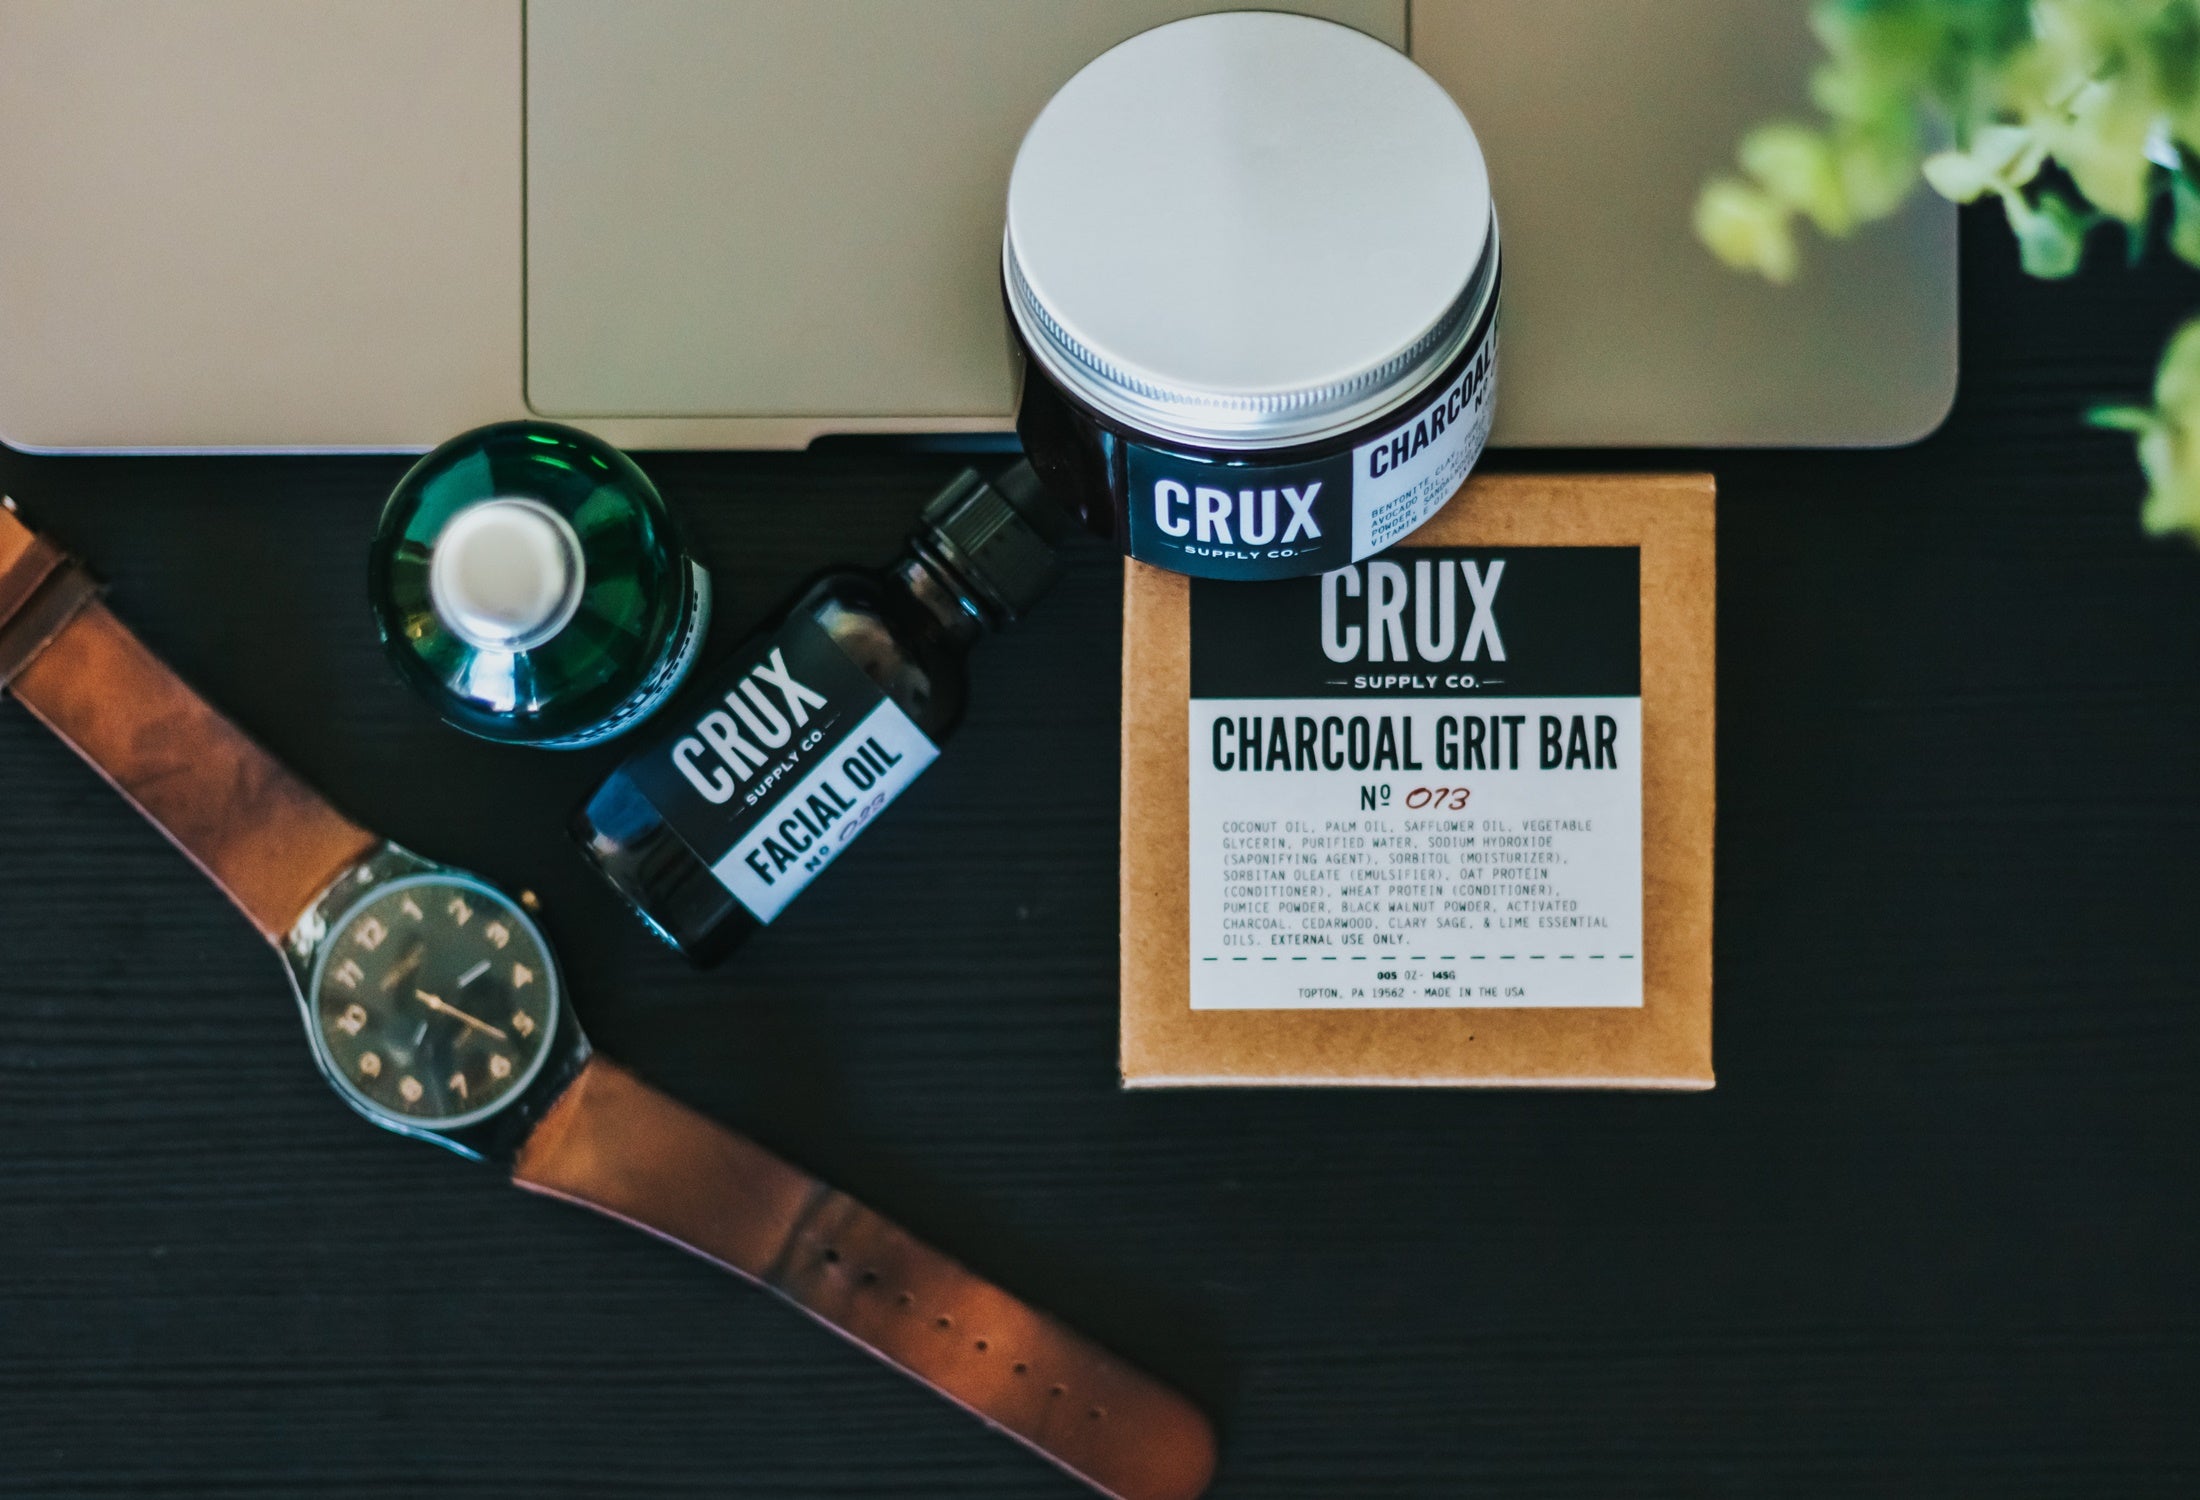 A product placement flat lay with soaps and male grooming products and a watch.